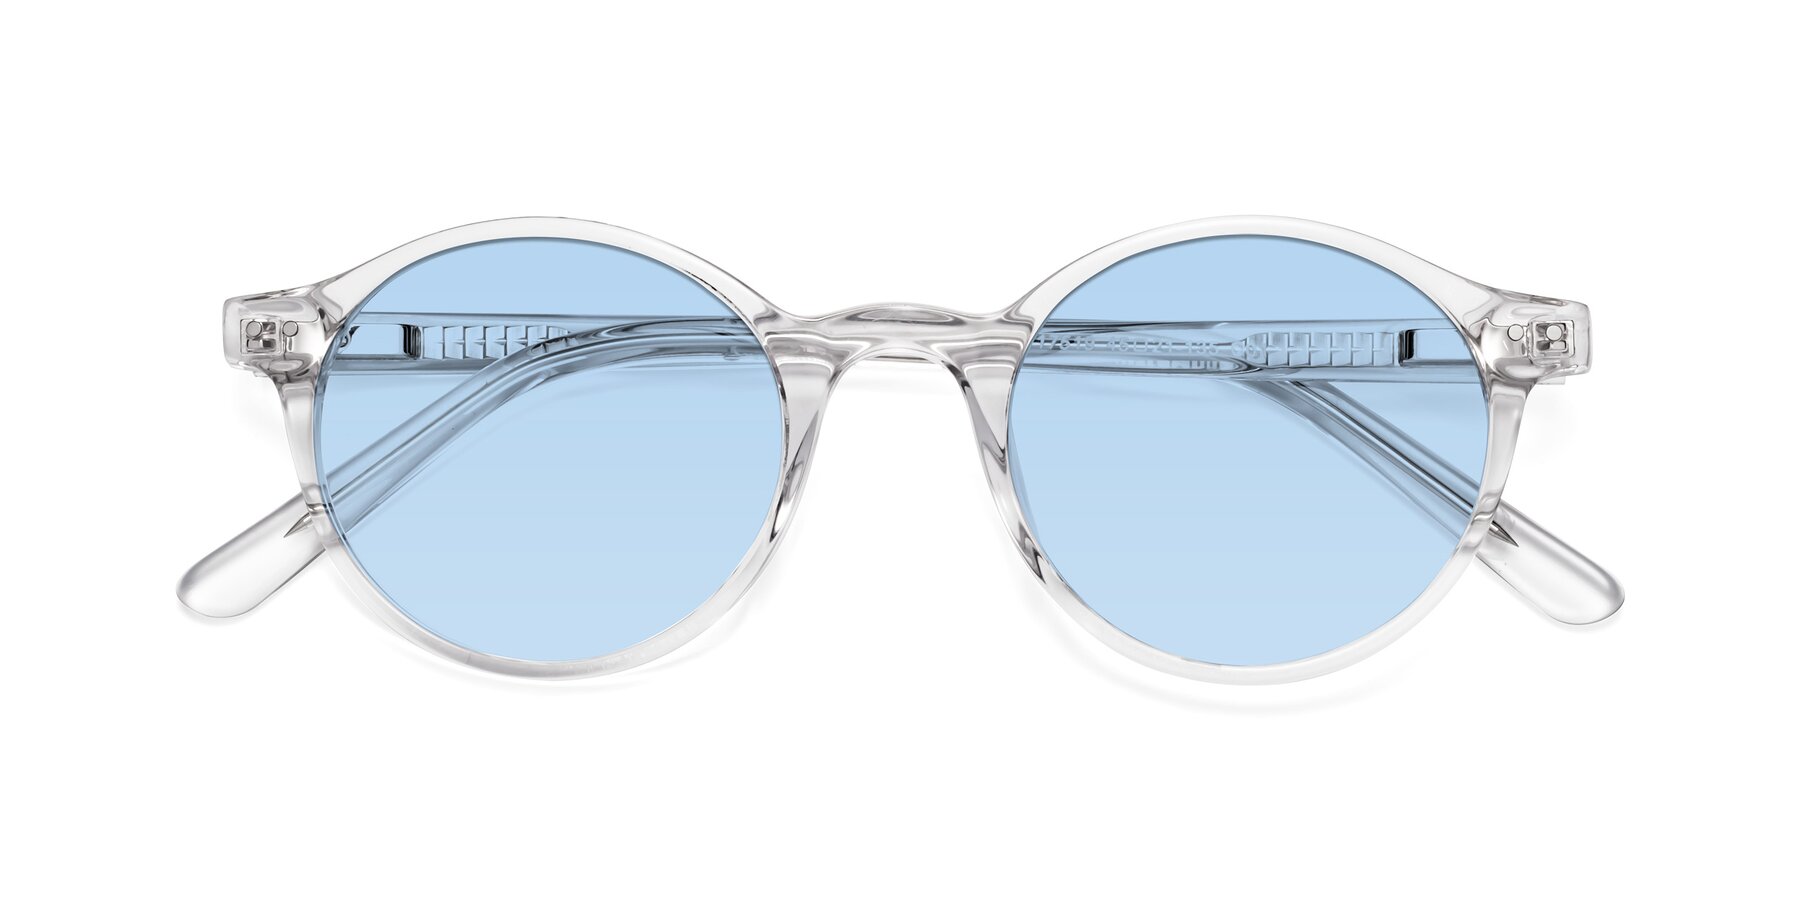 Clear Narrow Acetate Round Tinted Sunglasses With Light Blue Sunwear Lenses 17519